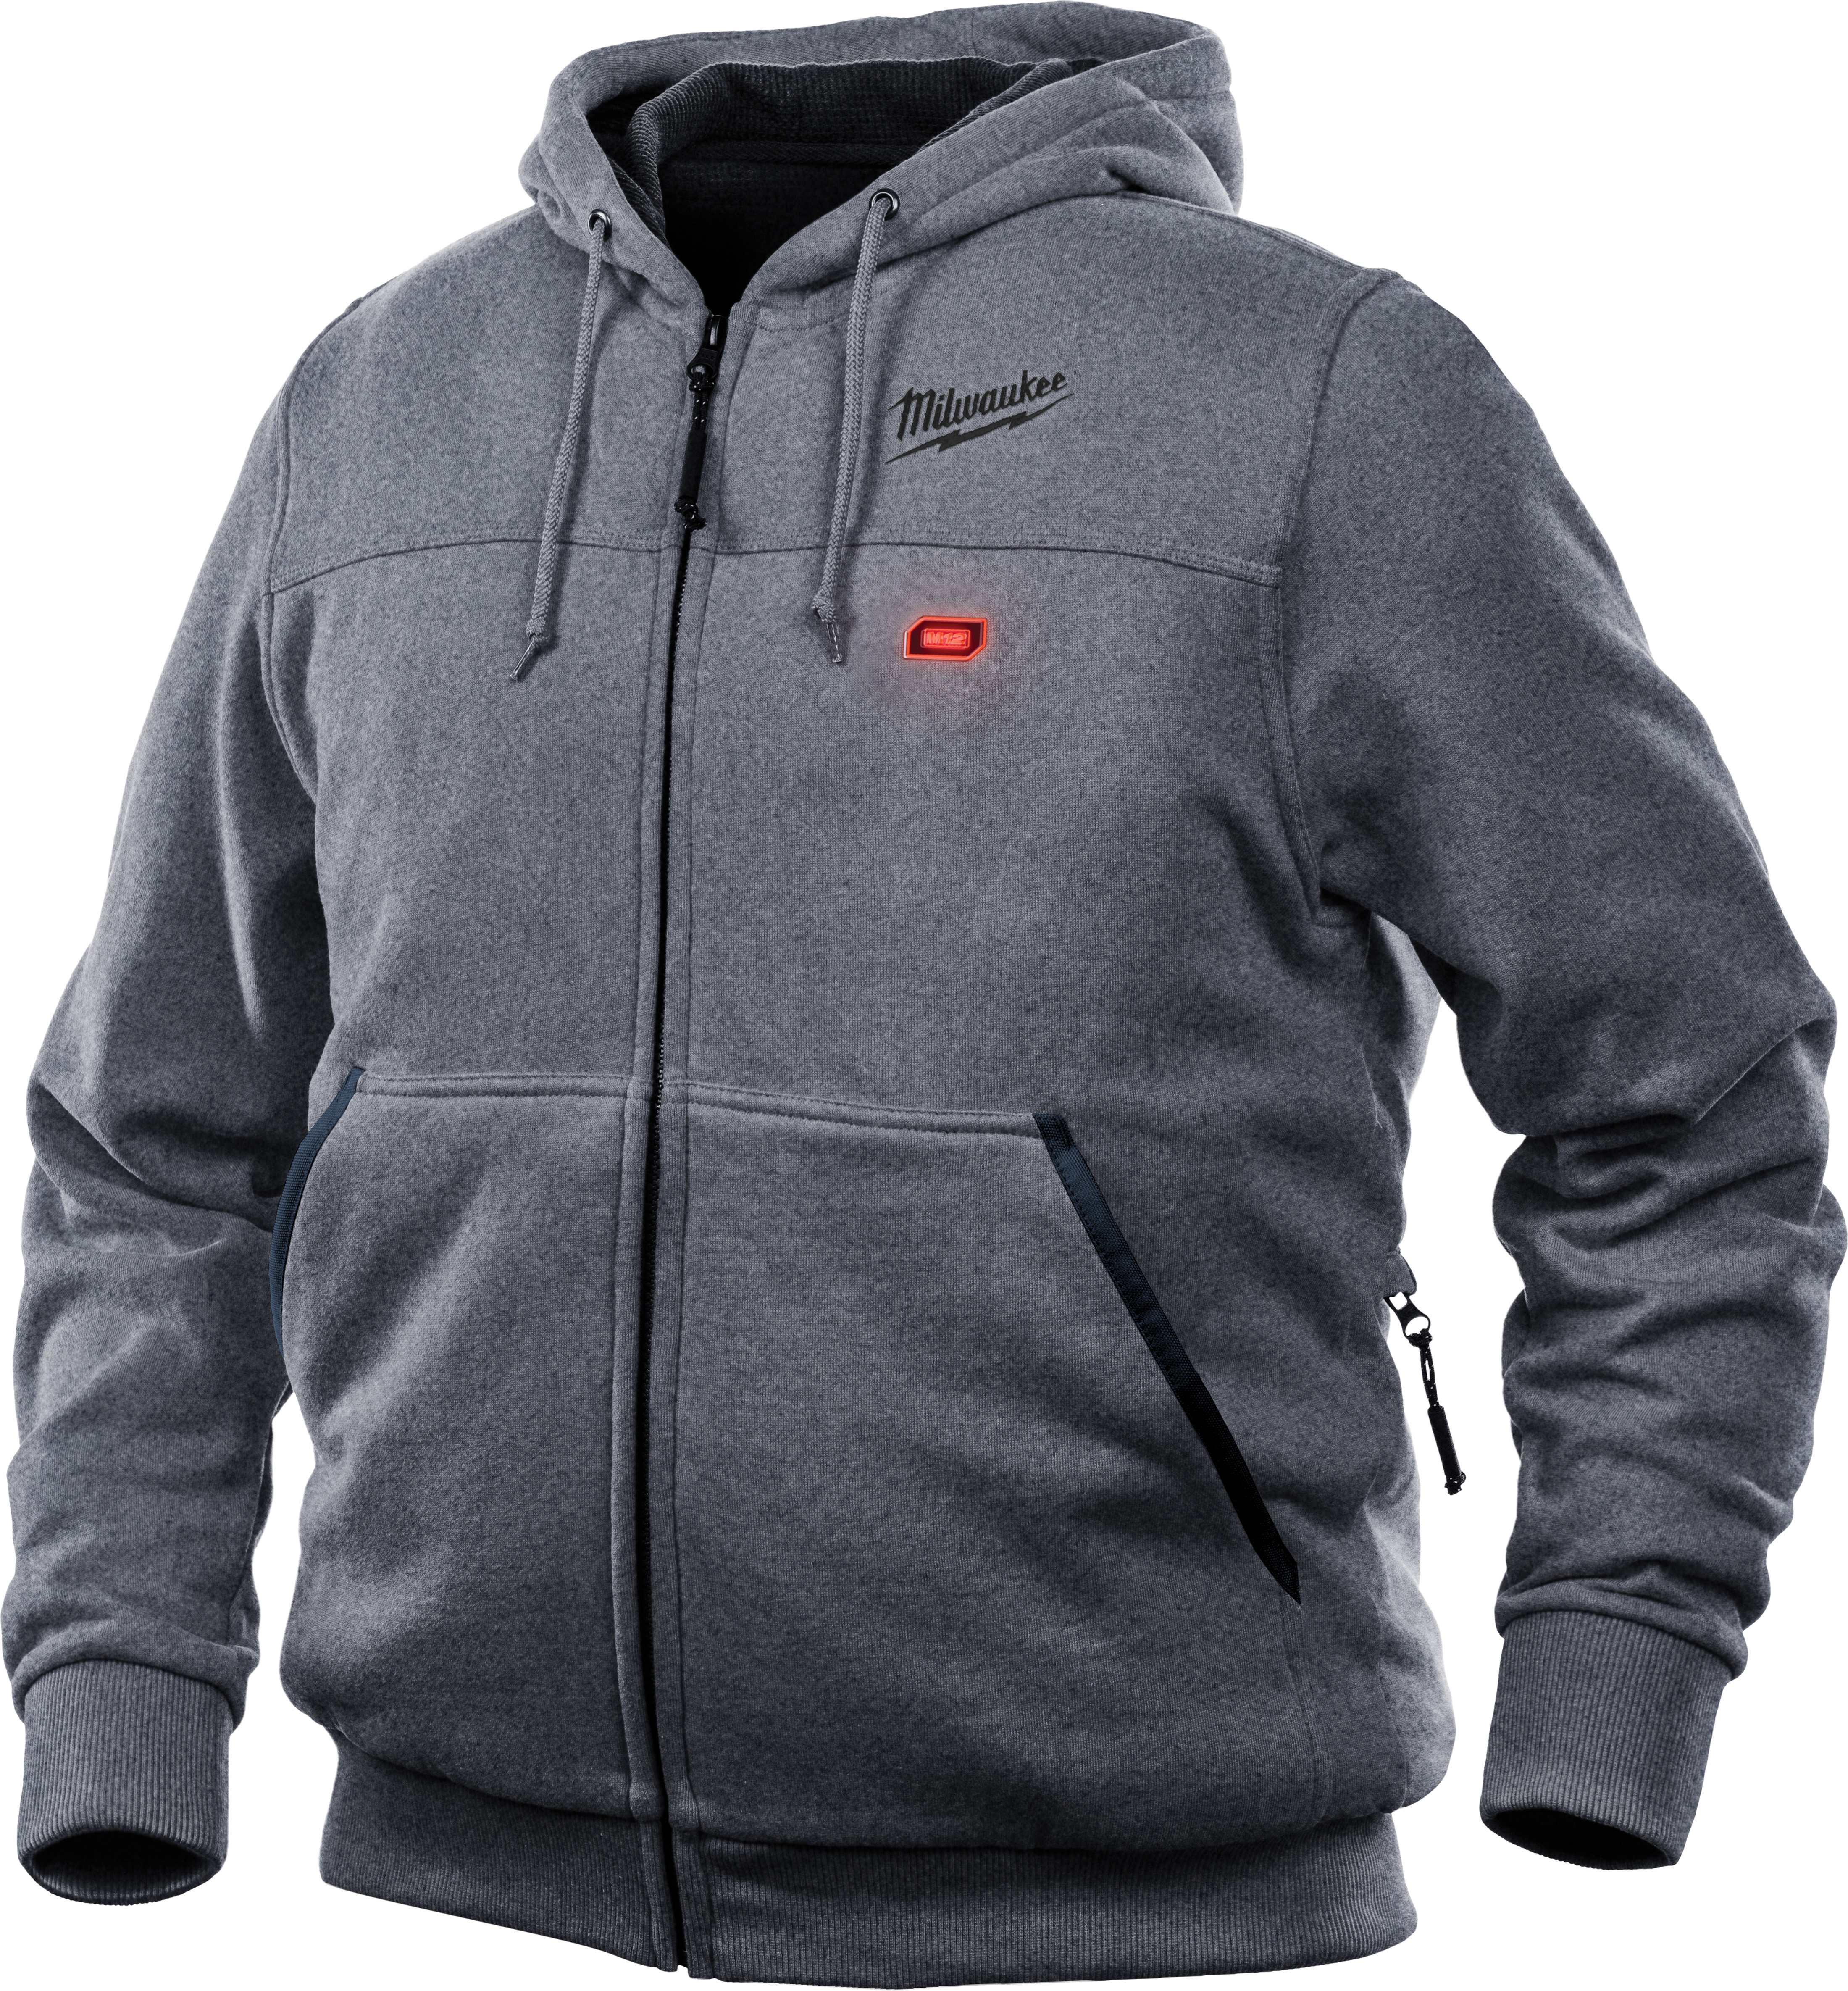 Men's 3X-Large M12 12-Volt Lithium-Ion Cordless Gray Heated Hoodie Kit